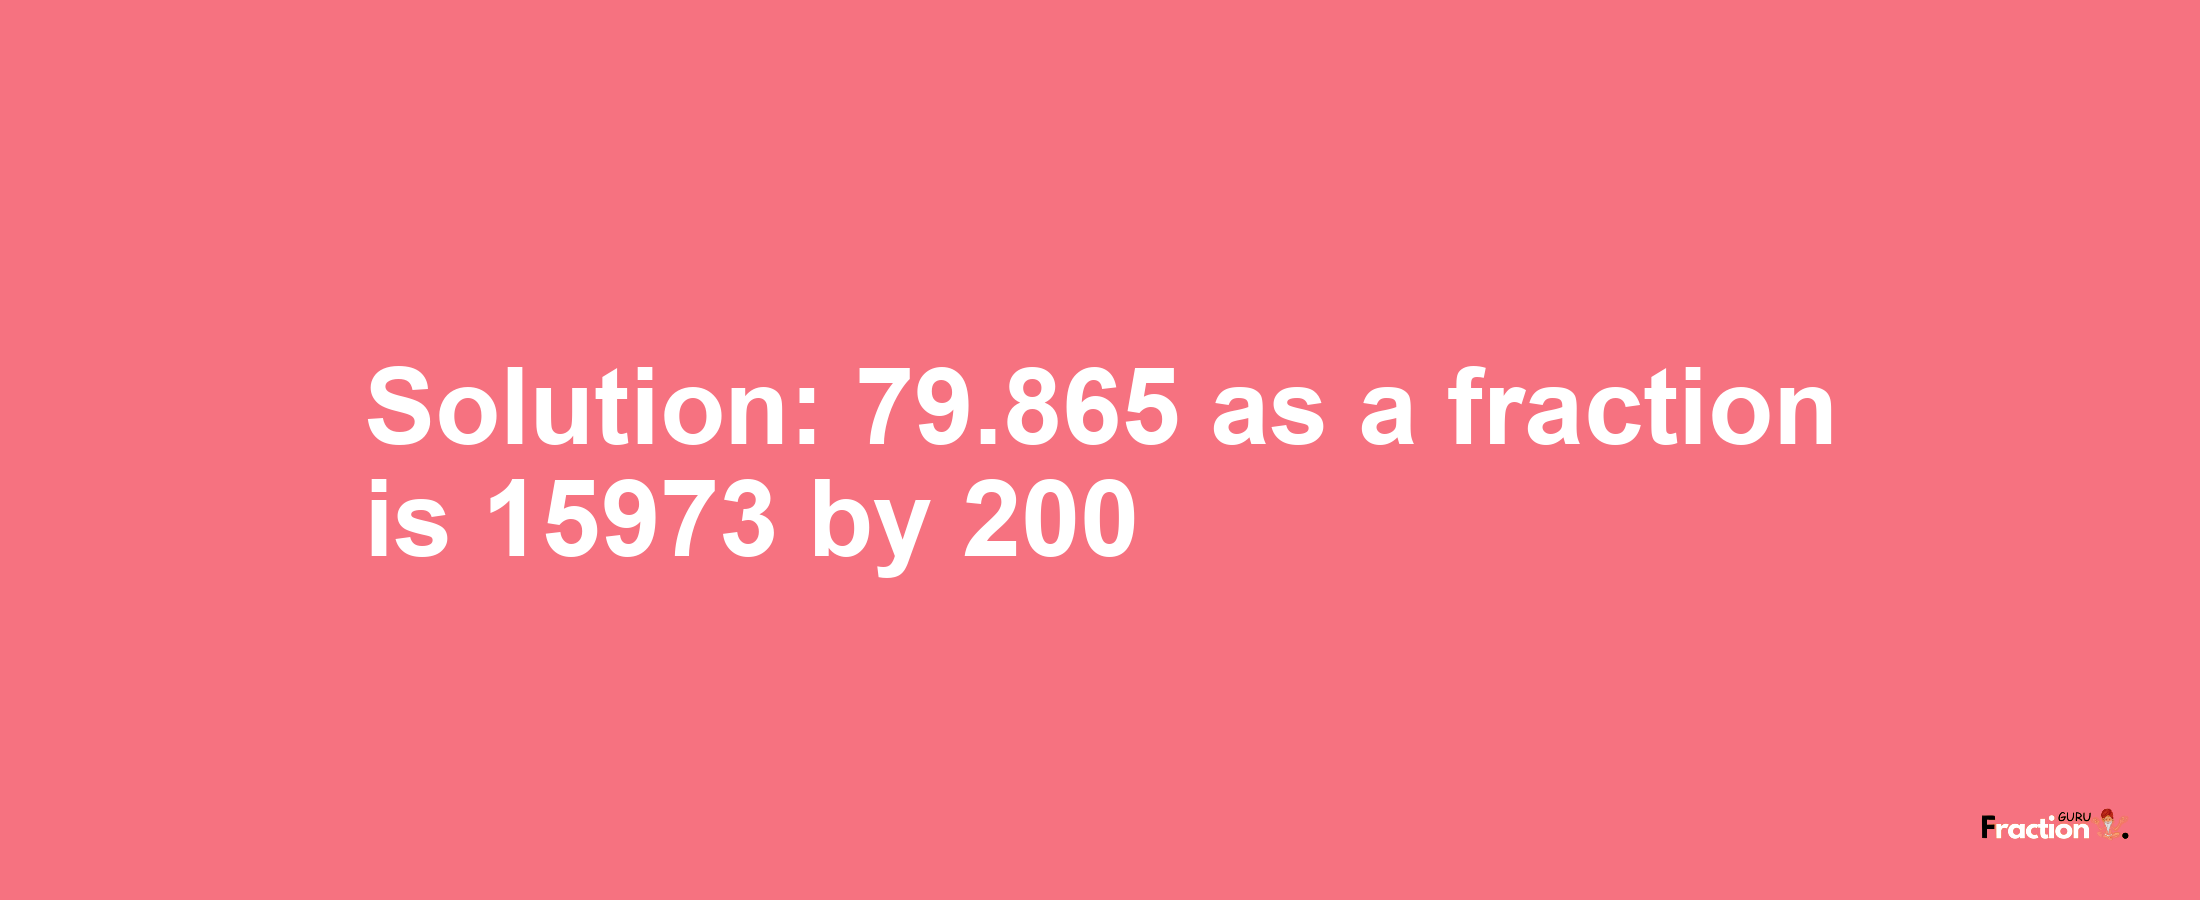 Solution:79.865 as a fraction is 15973/200